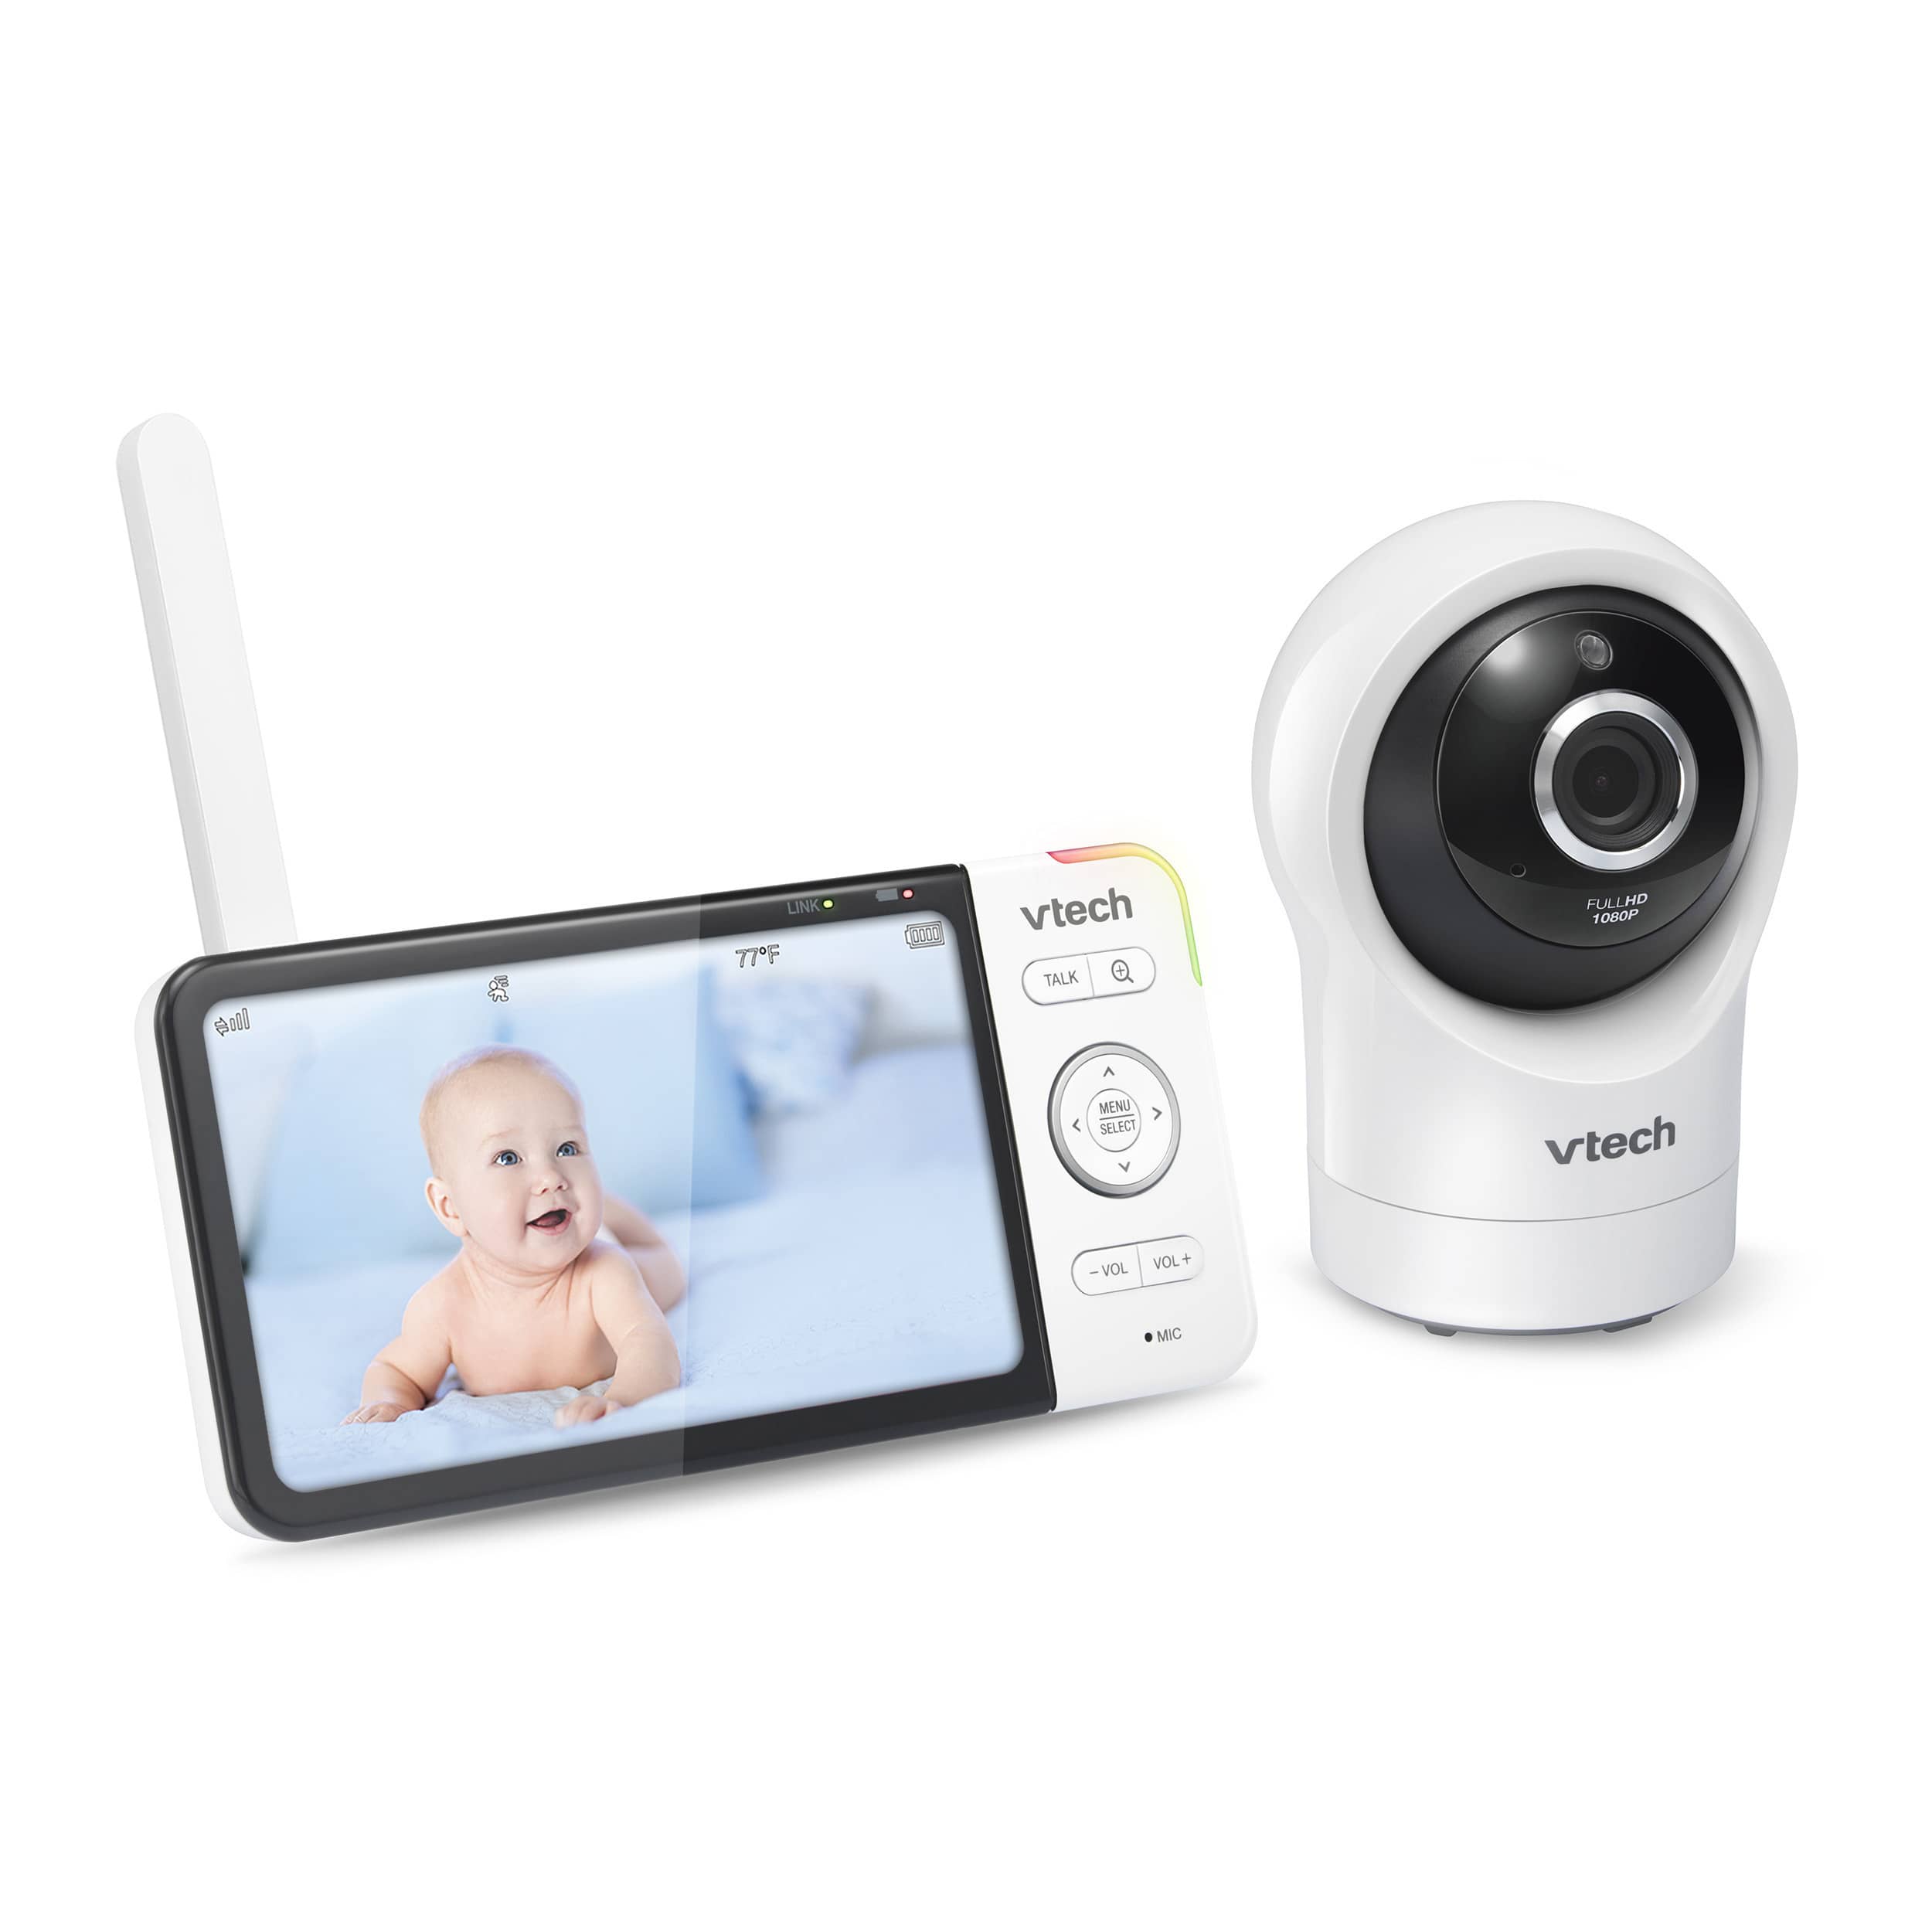 5-inch Smart Wi-Fi 1080p Pan and Tilt Monitor - view 2